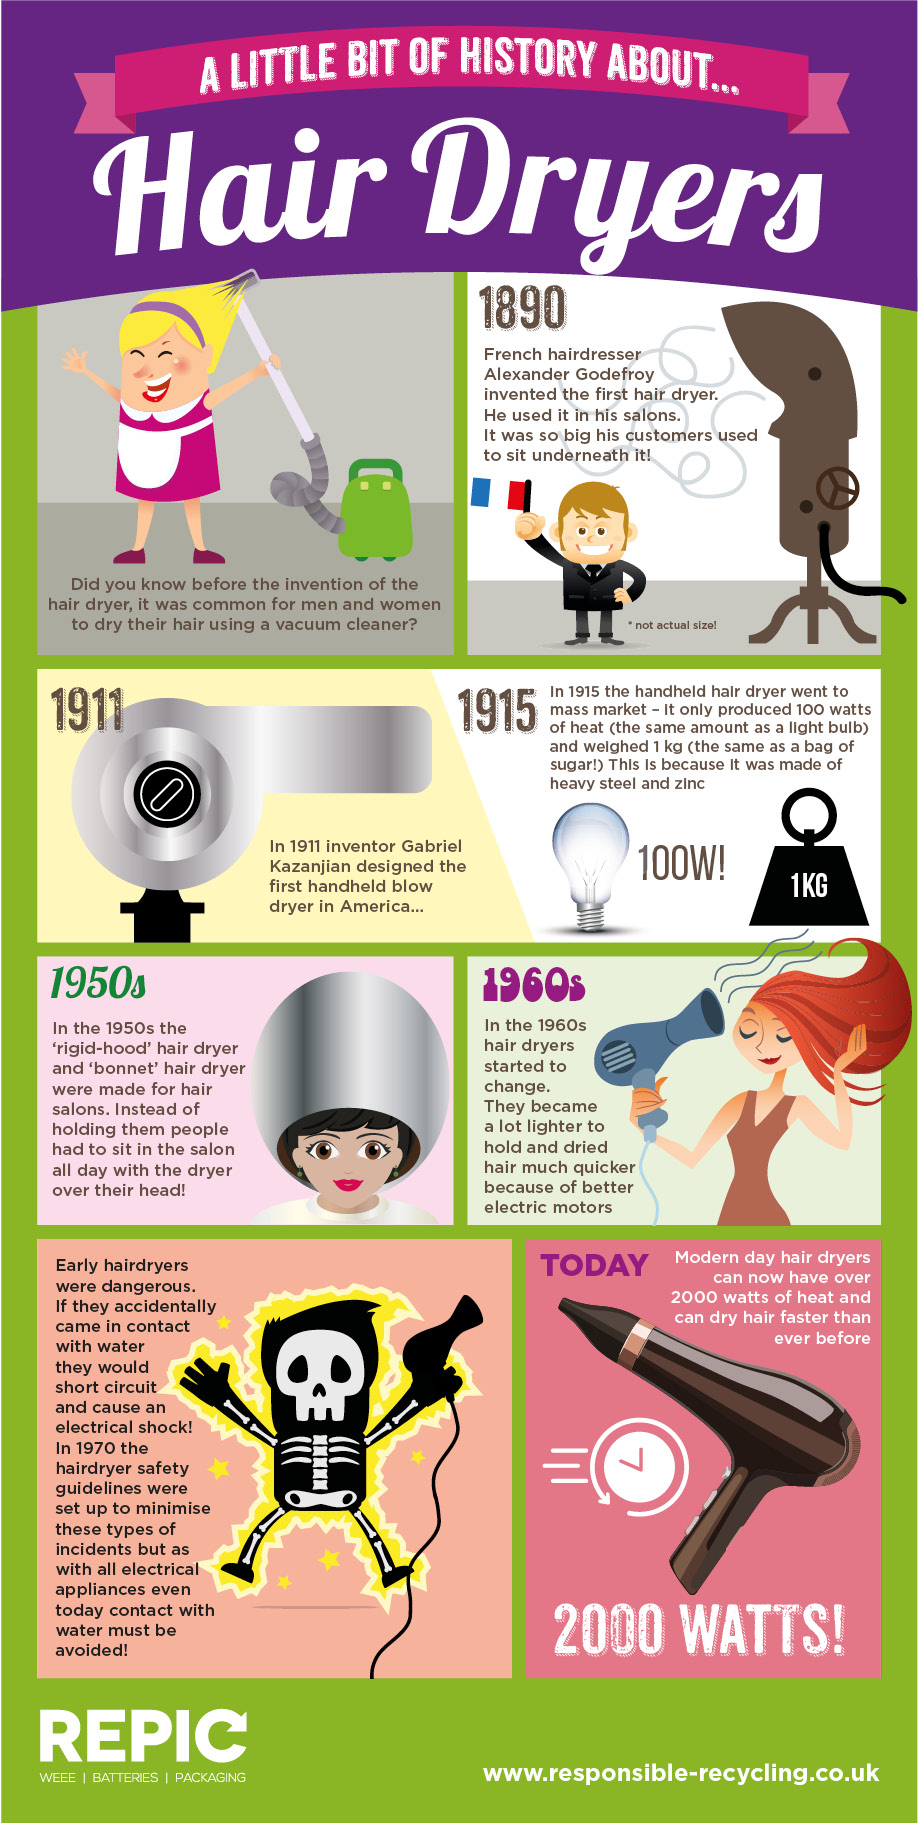 Repic-hair-dryers-infographic